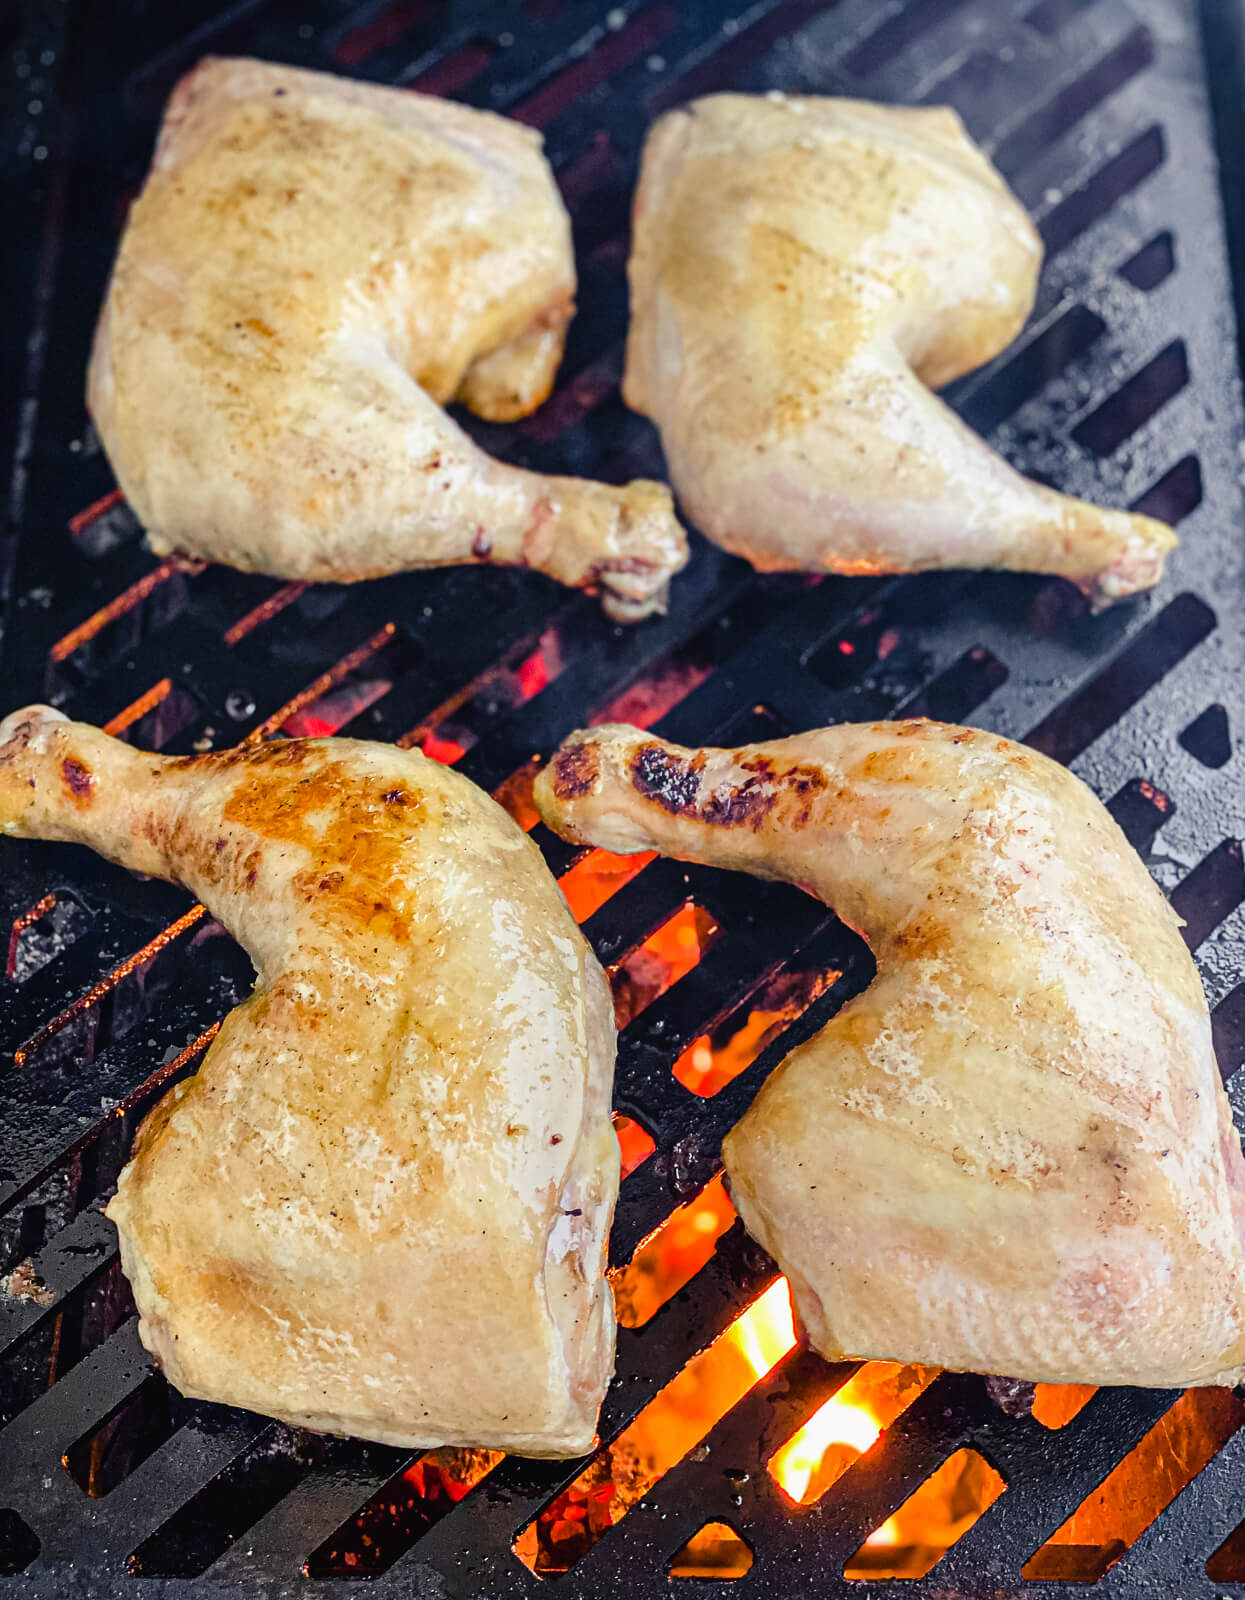 grilled chicken quarters on the grill skin side up